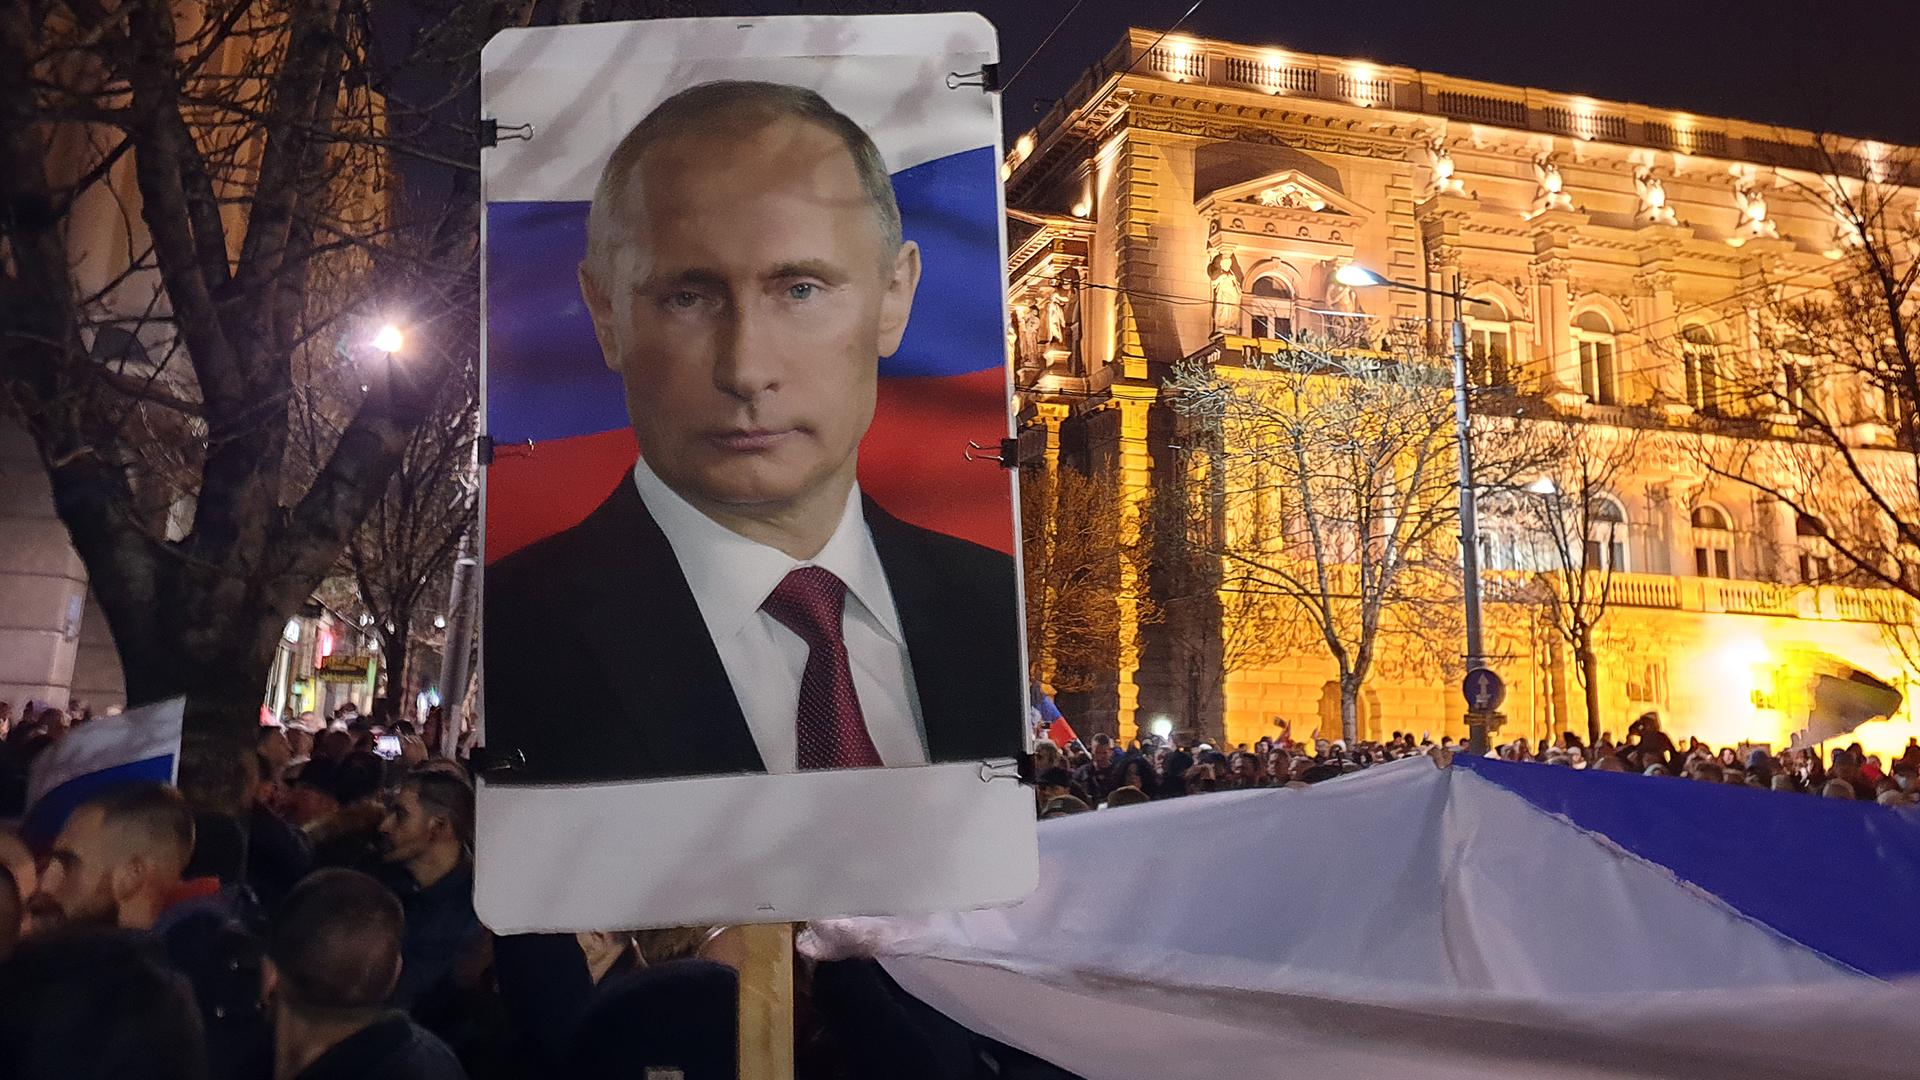 DIESES FOTO WIRD VON DER RUSSISCHEN STAATSAGENTUR TASS ZUR VERFÃGUNG GESTELLT. [BELGRADE, SERBIA - MARCH 4, 2022: People carry a portrait of Russian President Vladimir Putin as they take part in a rally in support of Russia and Donbass in central Belgrade. Participants in the event support Russia, the people of Donbass and denazification of Ukraine. According to the organizers, about 50 thousand people took part in the event outside the Russian Embassy. Pavel Bushuyev/TASS]